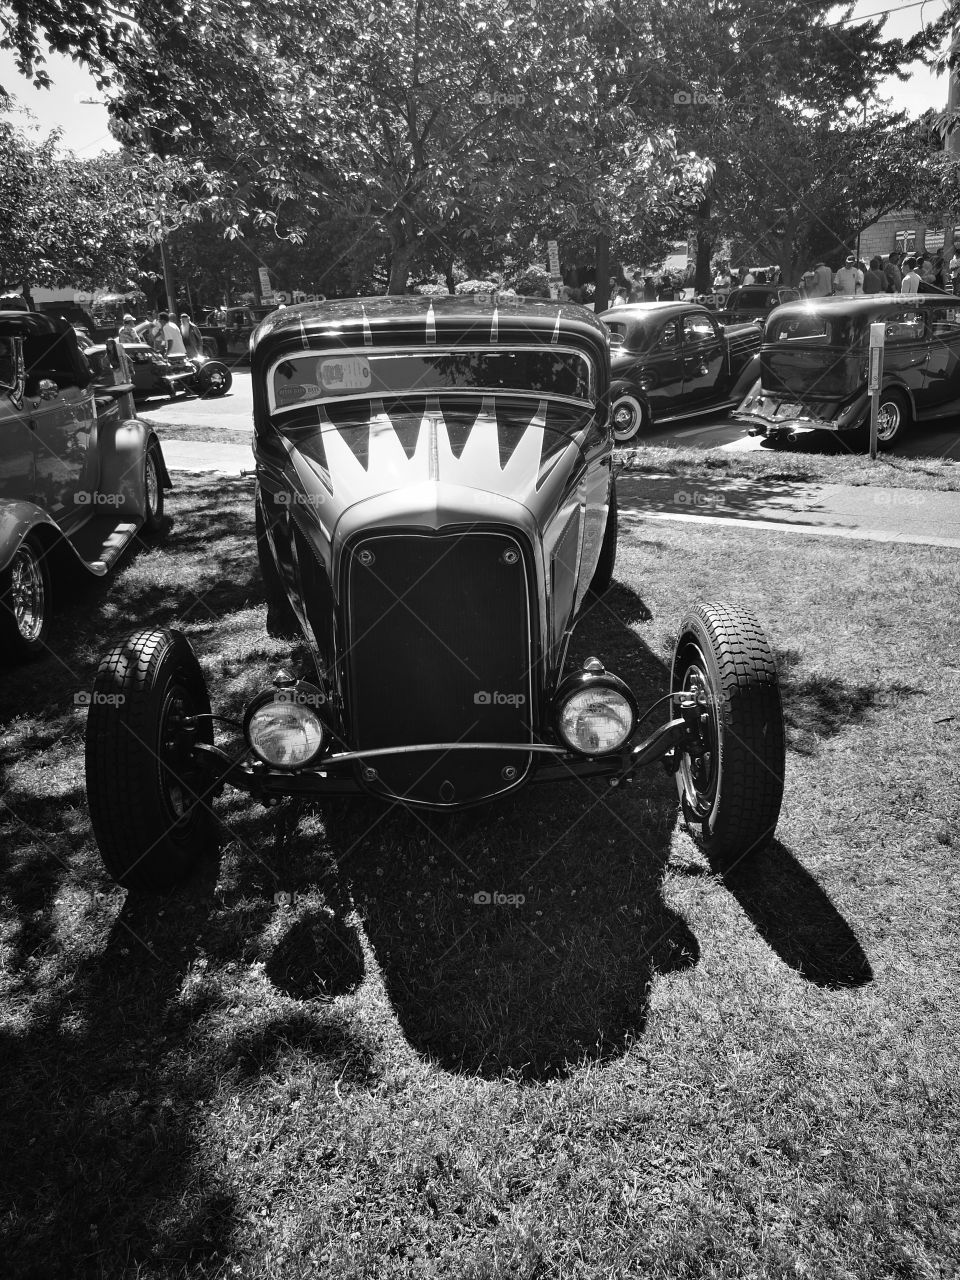 Antique Cars for black and white